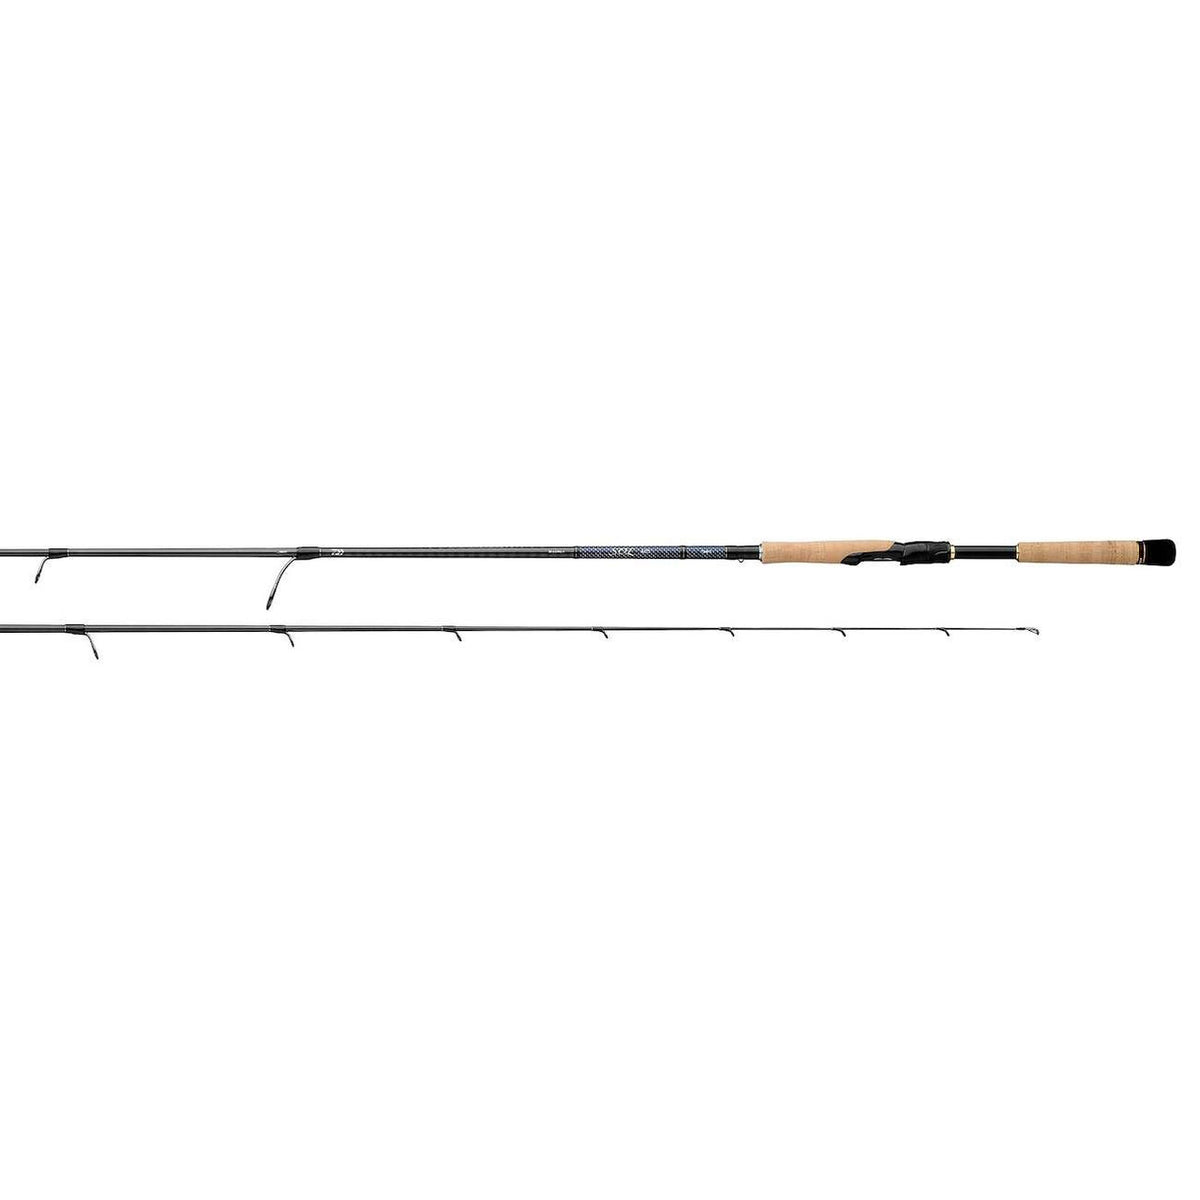 Daiwa SOL Inshore 12-25 AGS 7FT6IN Heavy Spinning - 76HFS